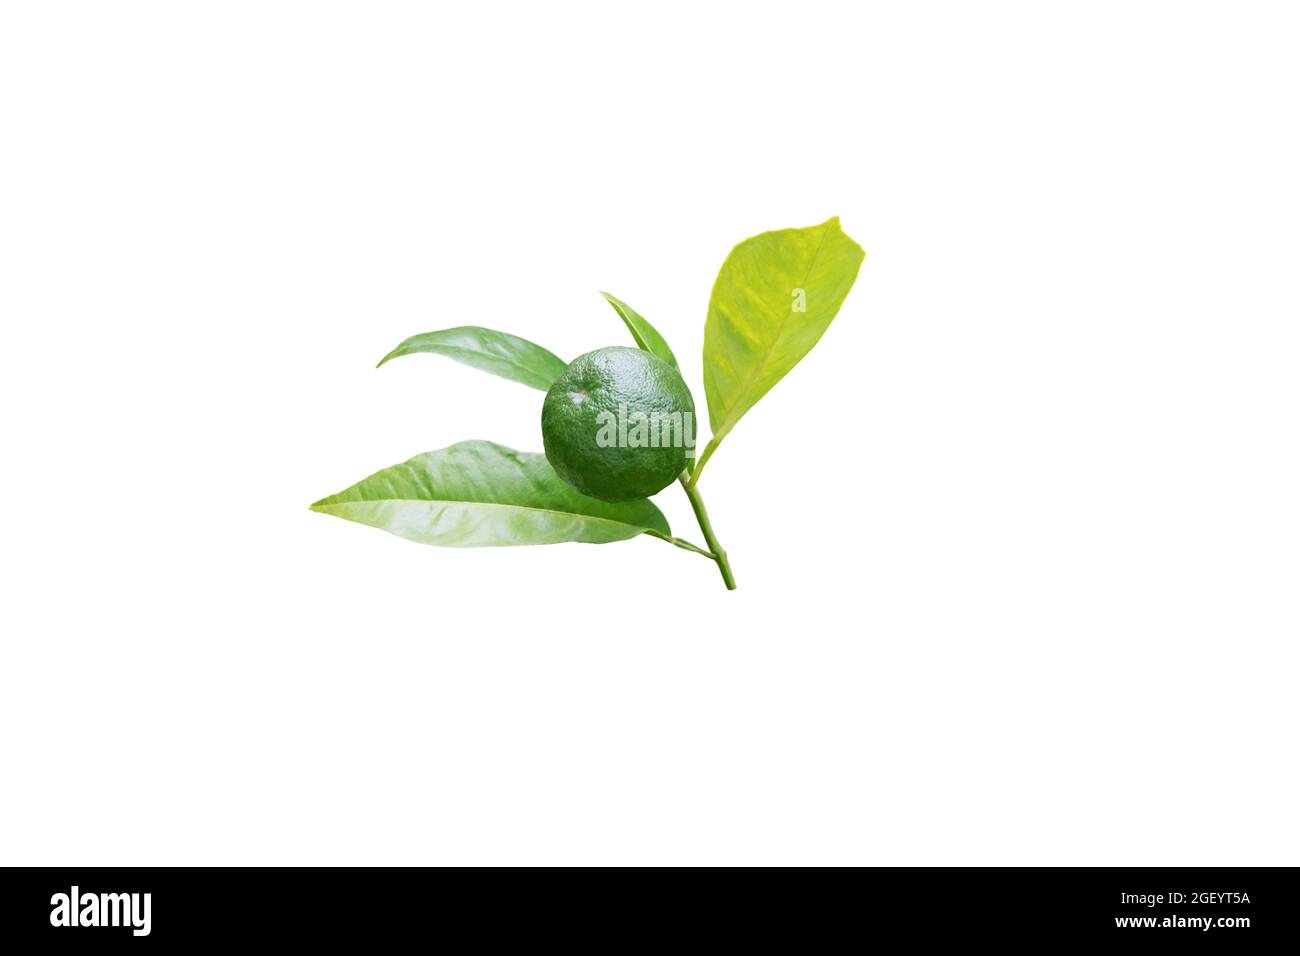 Orange tree branch with leaves and green unripe fruit isolated on white Stock Photo